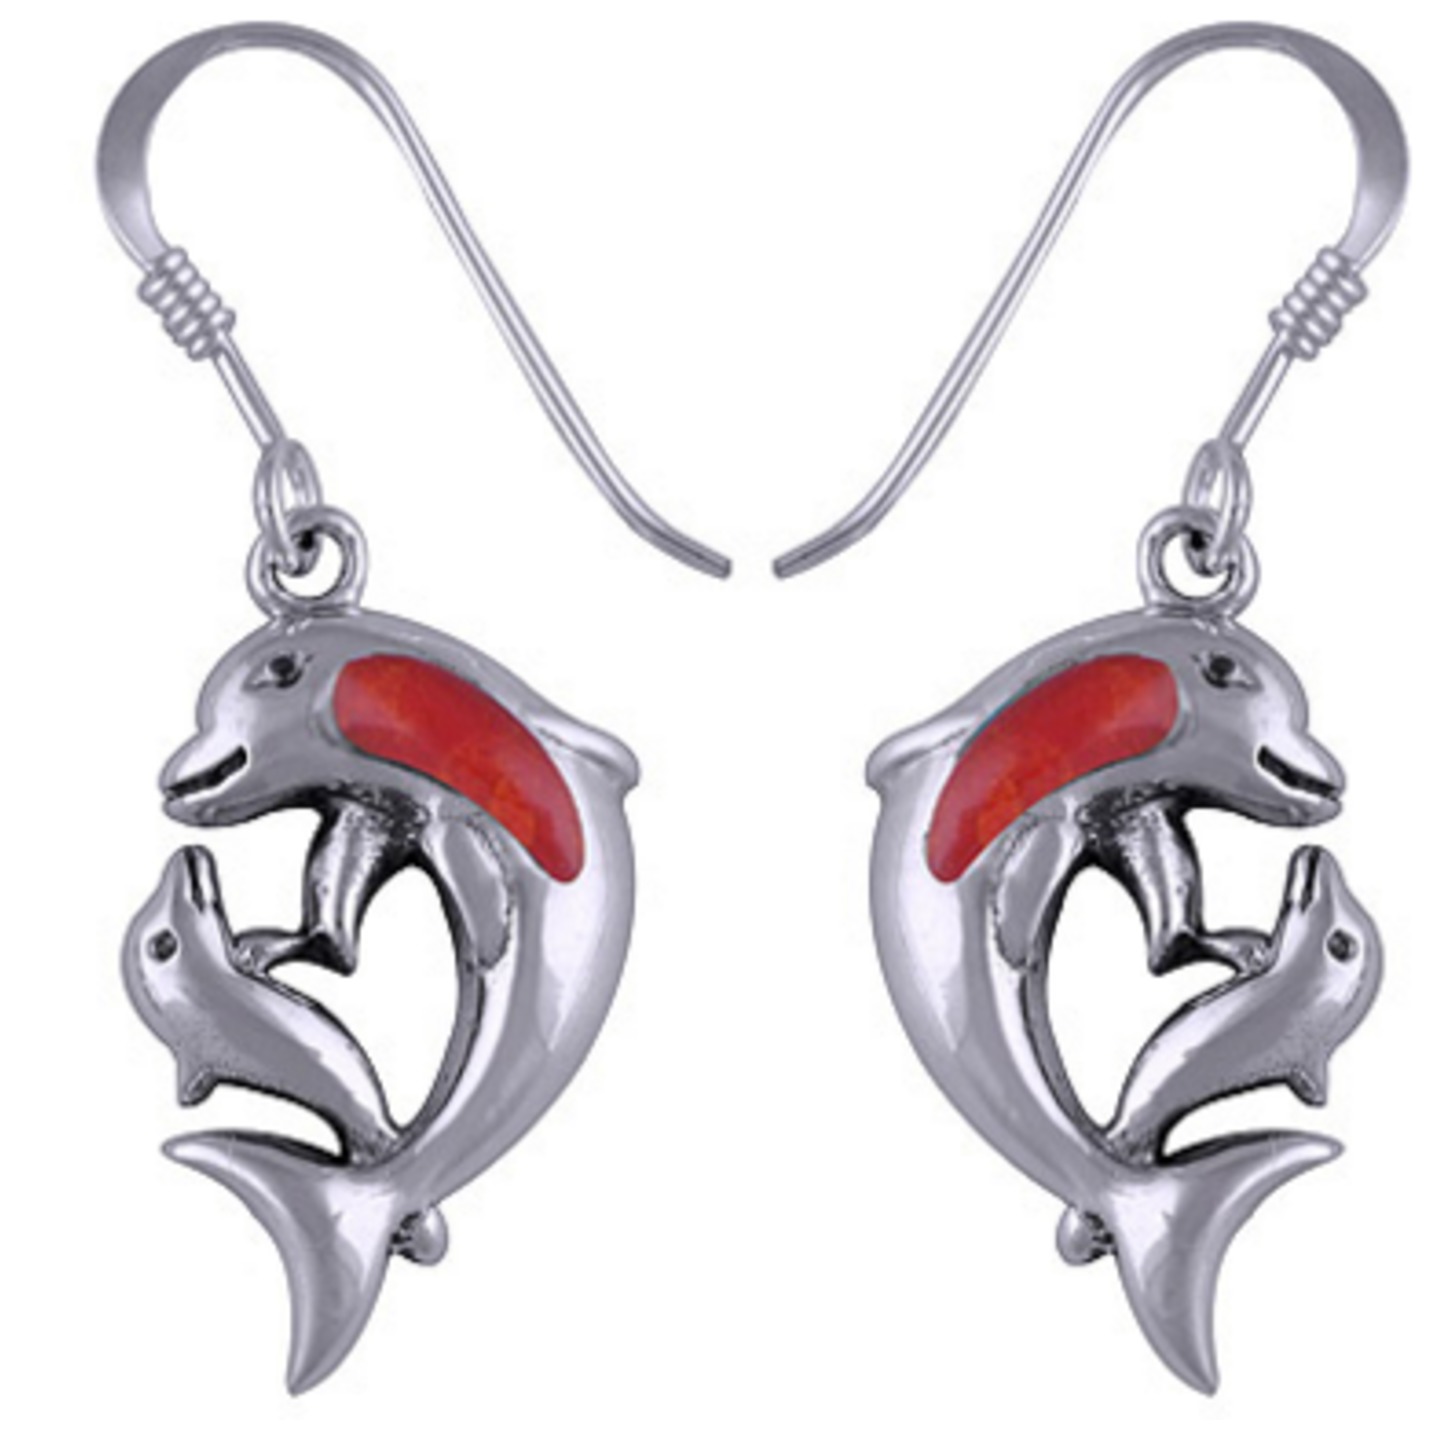 The Dolphin Silver Earring